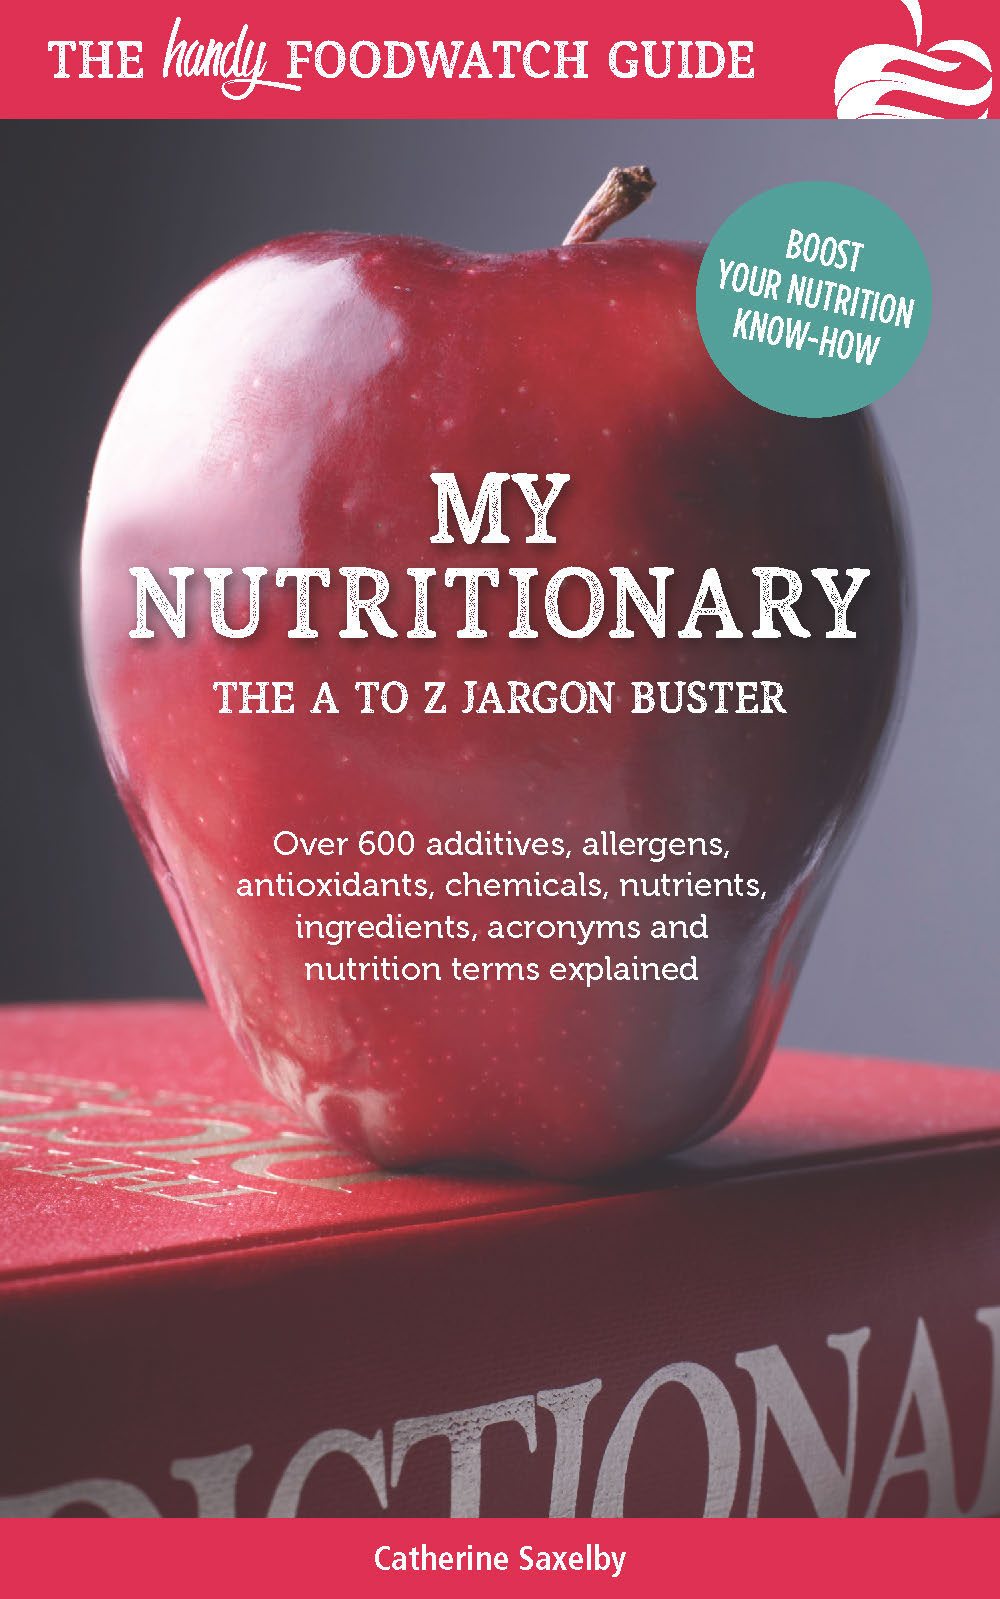 Foodwatch Nutritionary Ebook cover FINAL 203x127mm